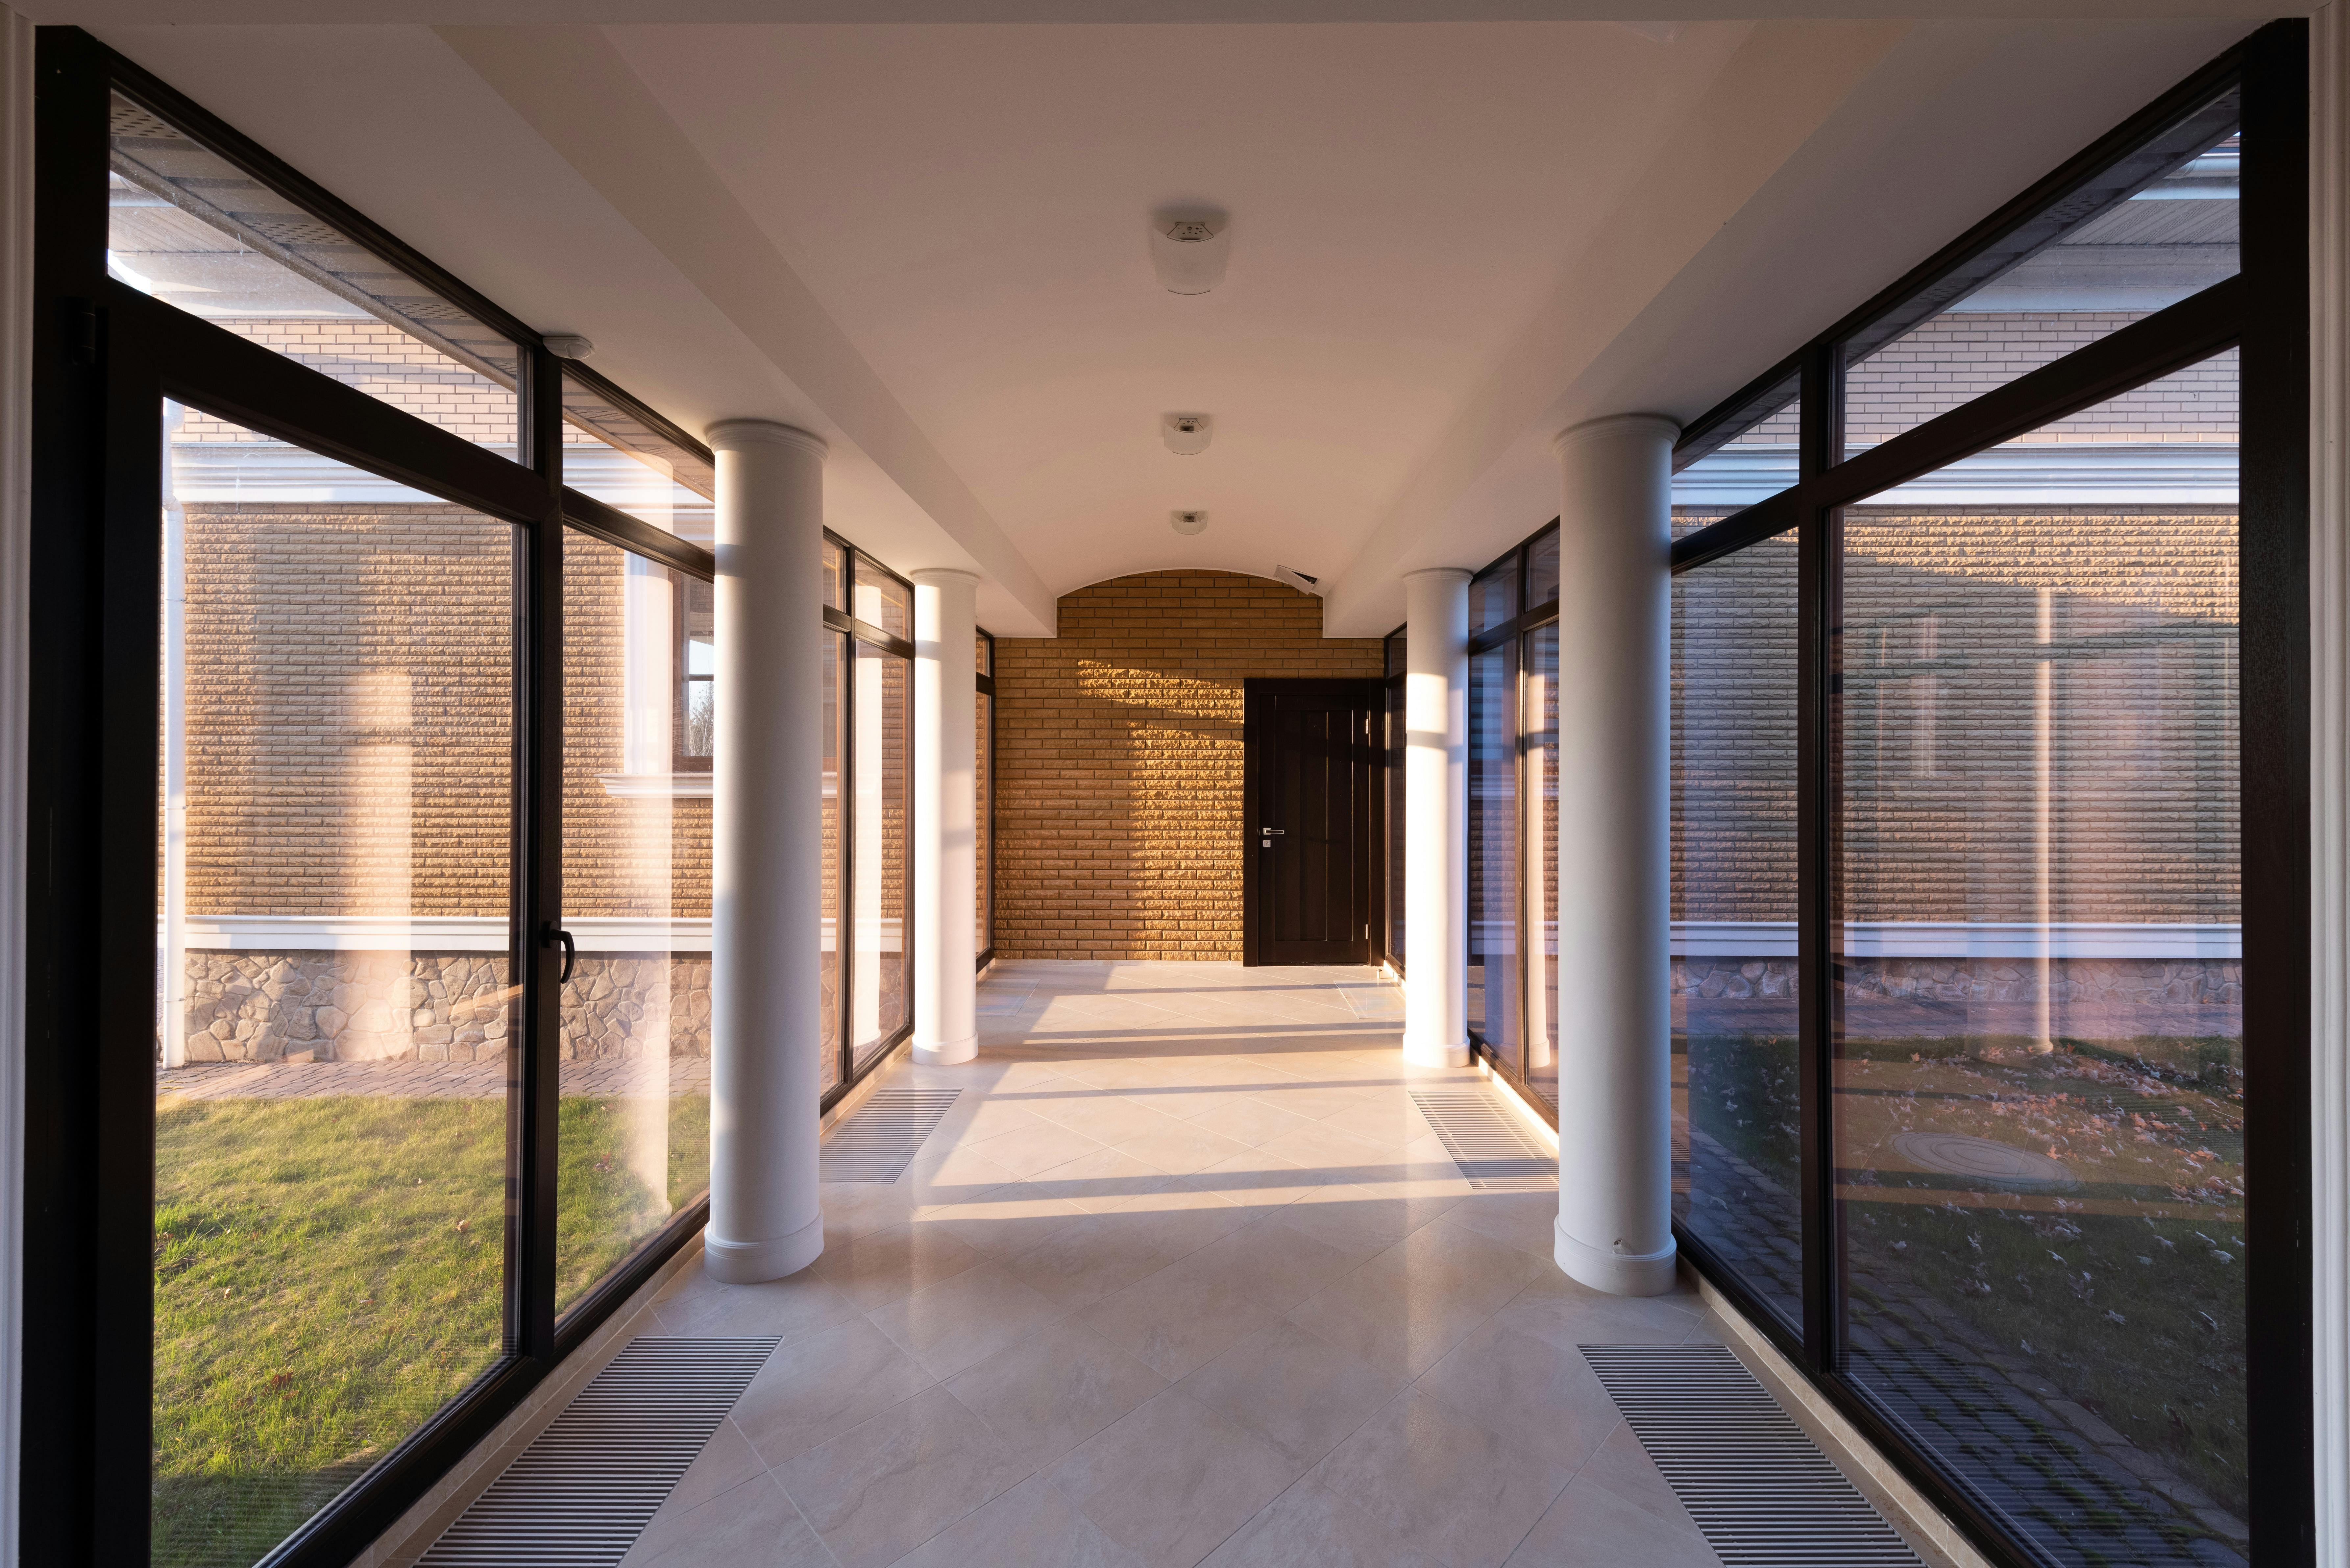 corridor of modern building with glass walls